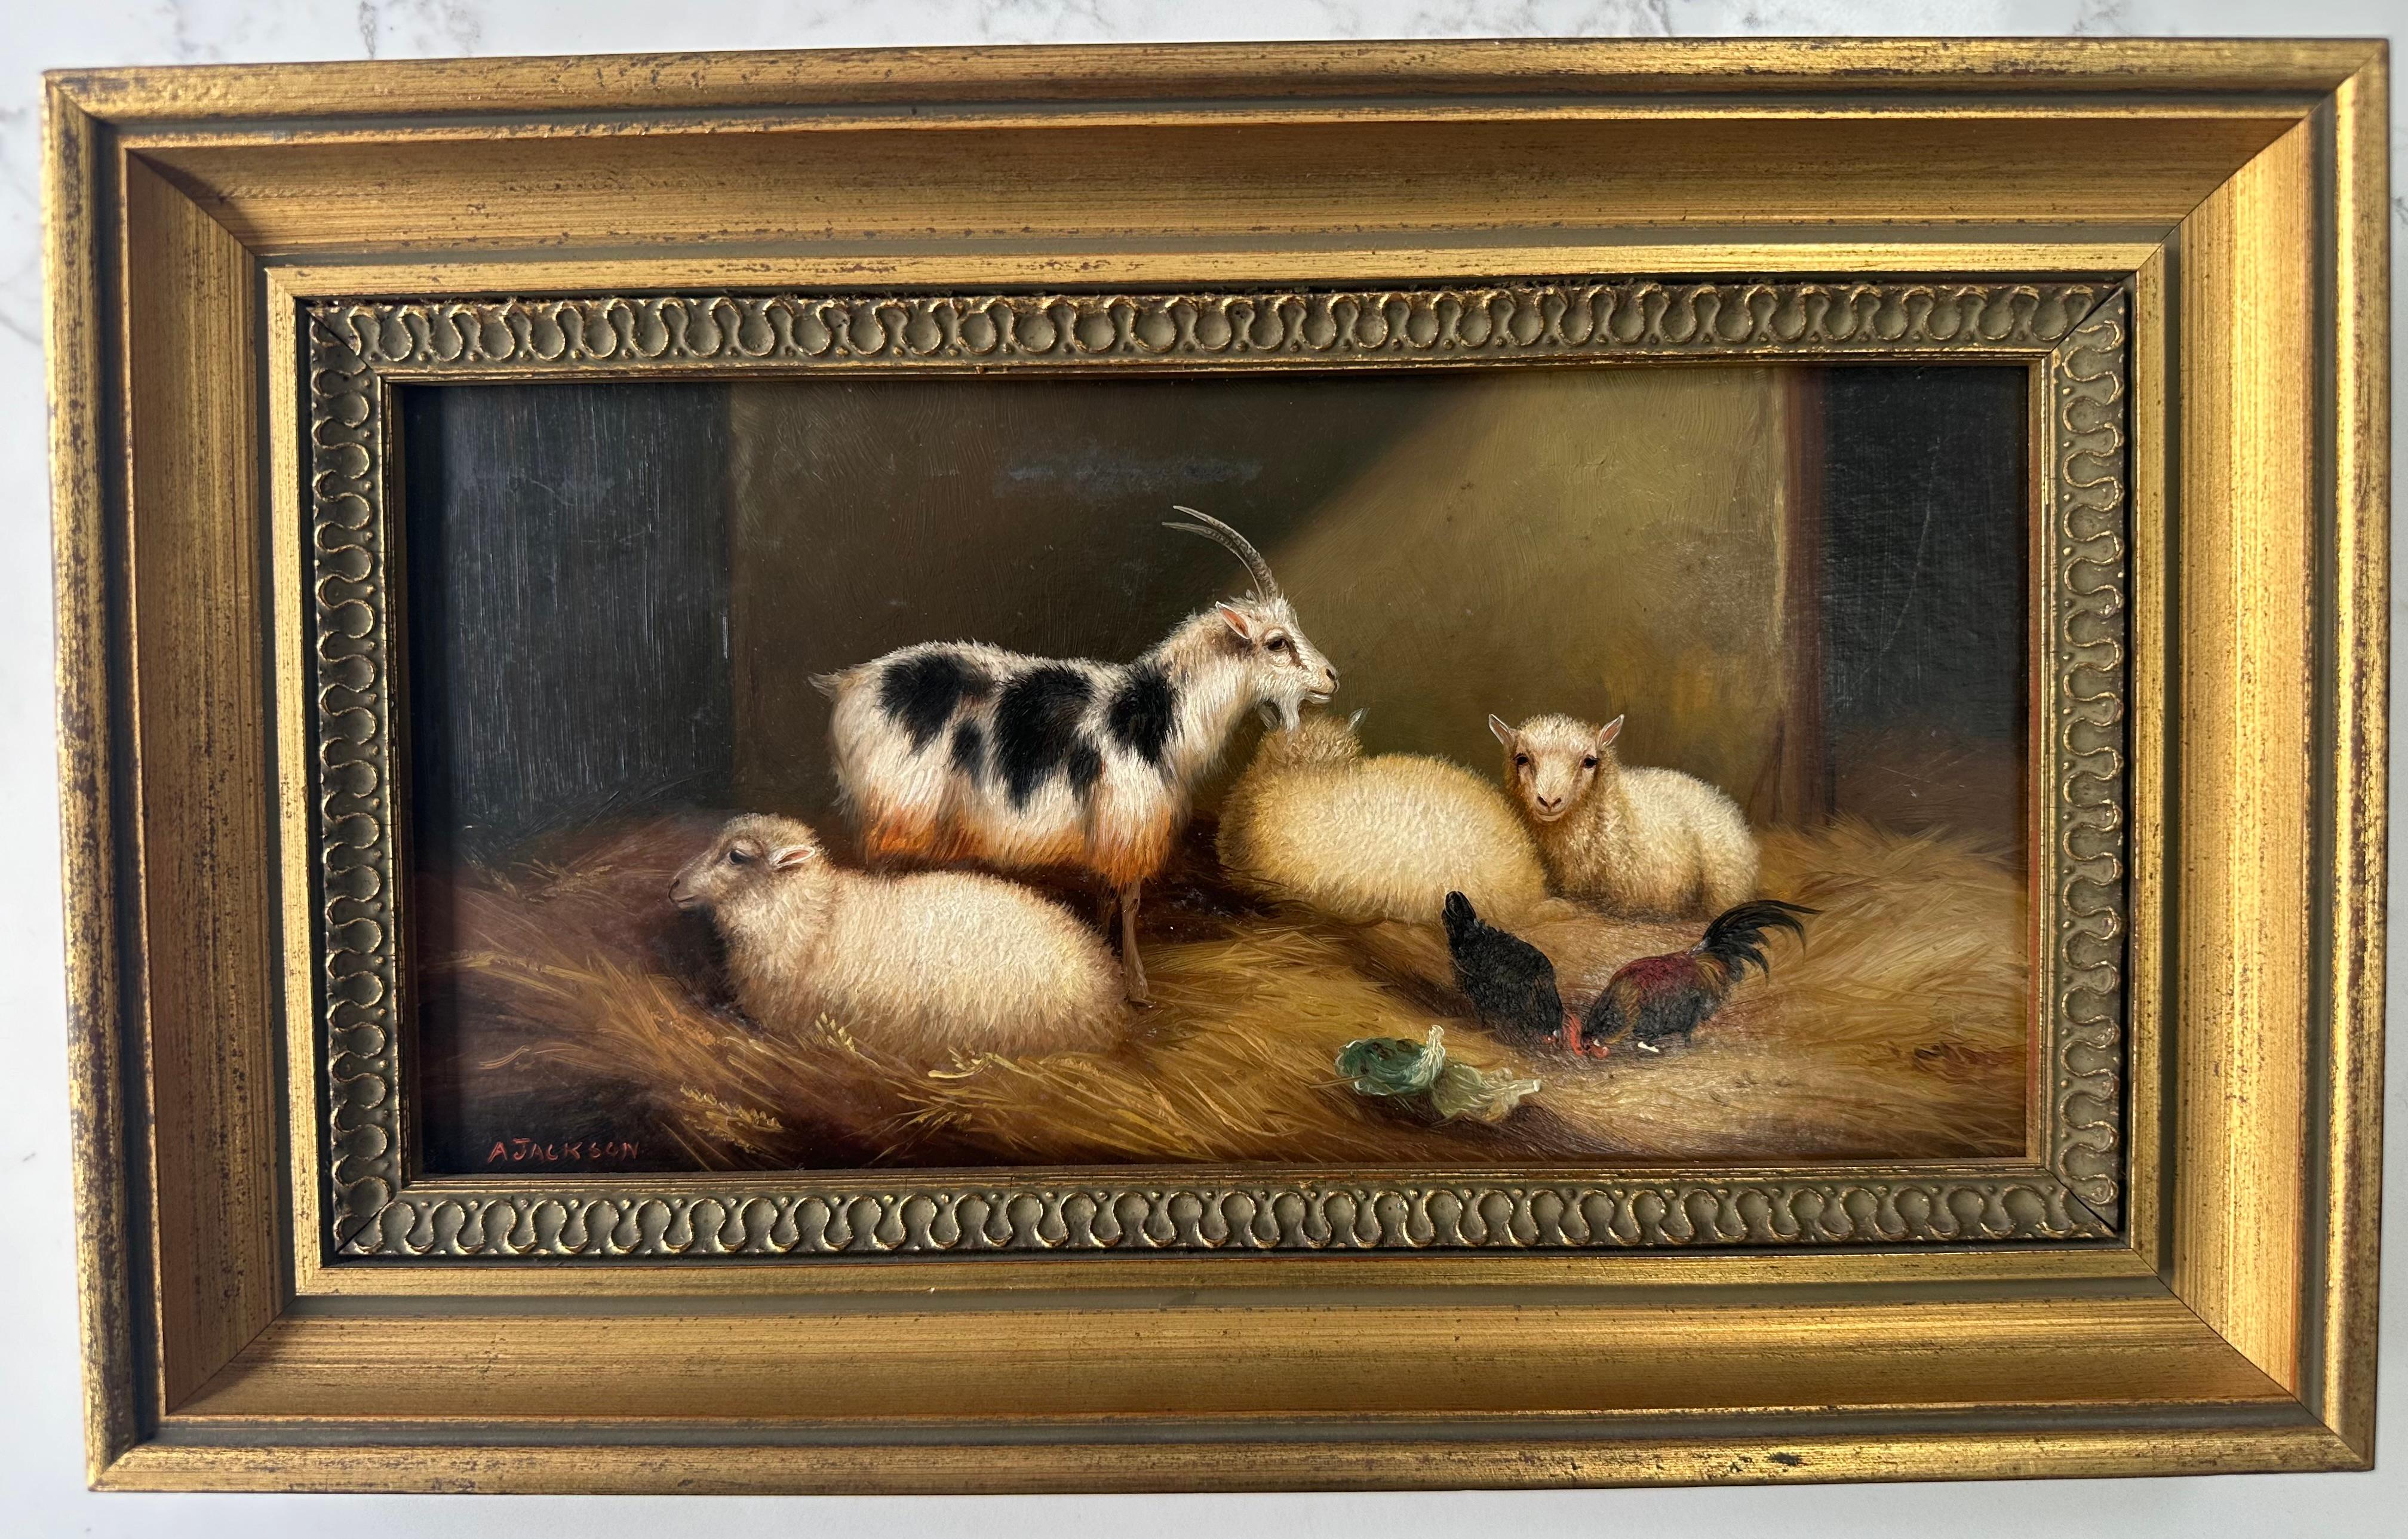 A fine pair of oil on board farm yard scenes, consisting of sheep, hens, goats and chickens. Surrounded by two lovely gold guilt frames. 
Signed and painted by the British artist Albert Jackson . 1873 to 1952.